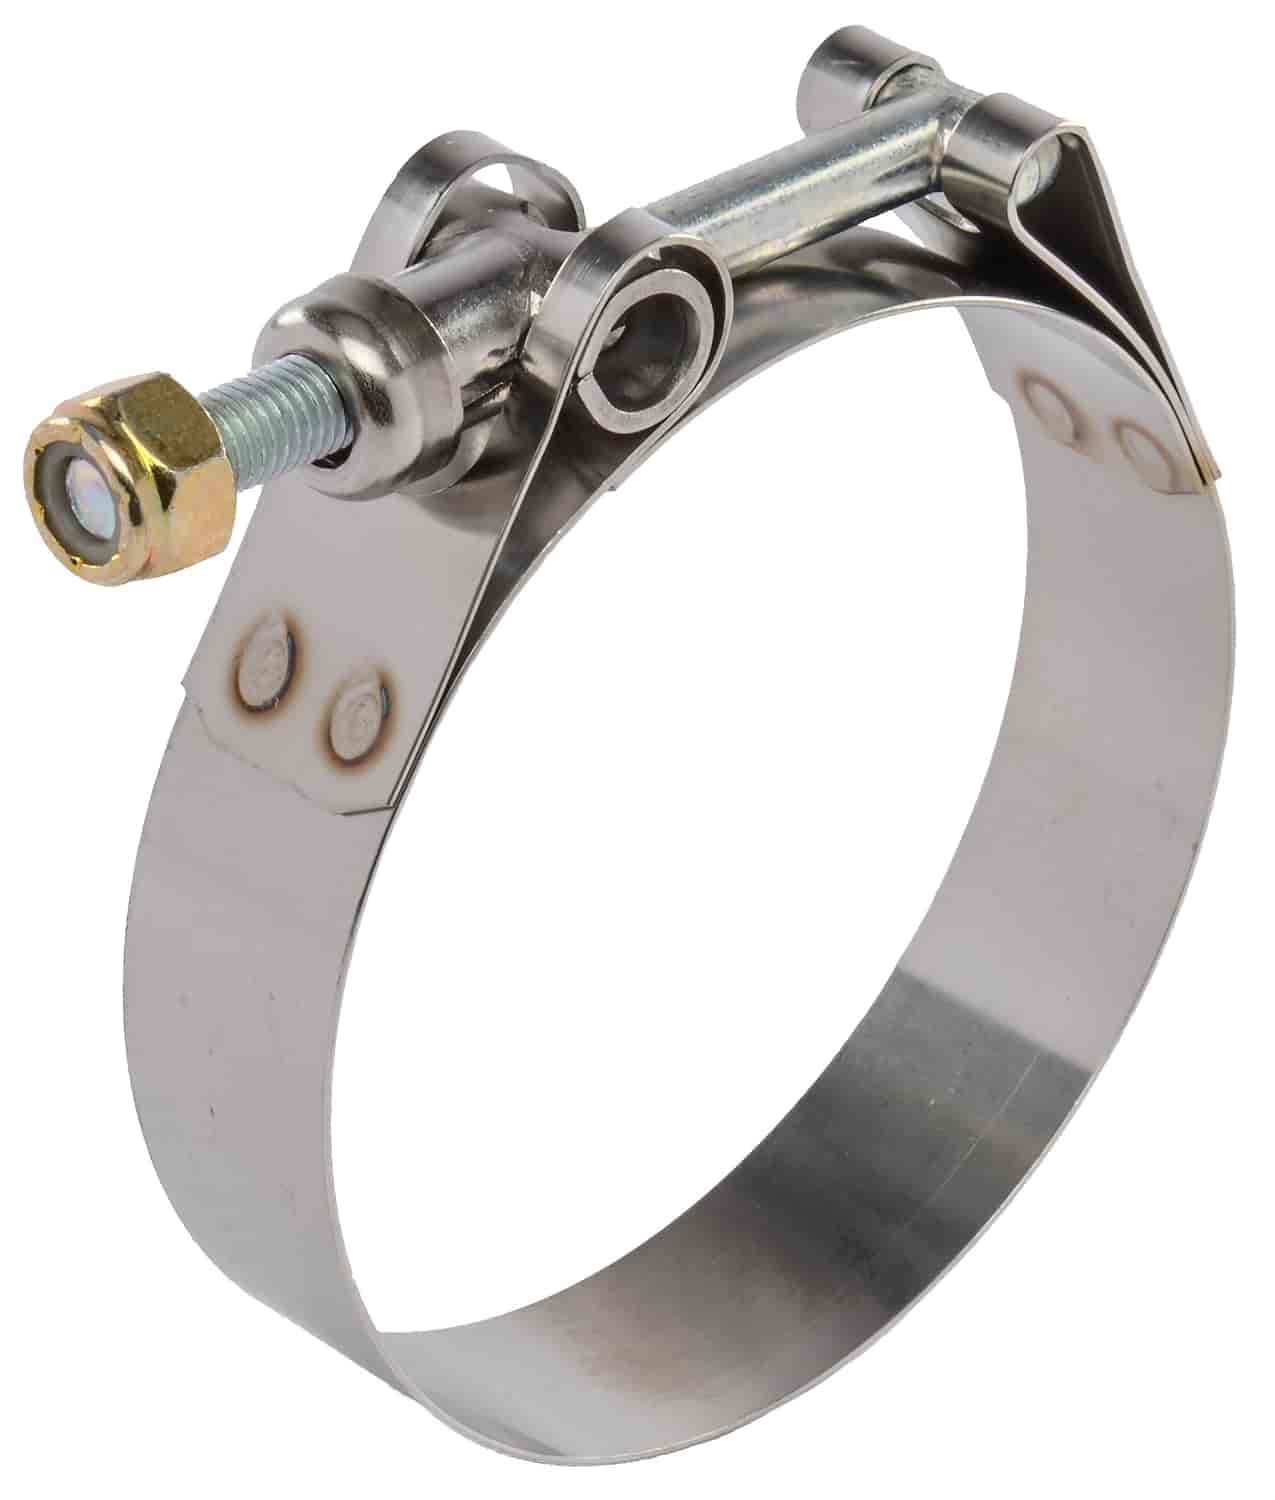 T-Bolt Hose Clamp 2.900" to 3.210" ID